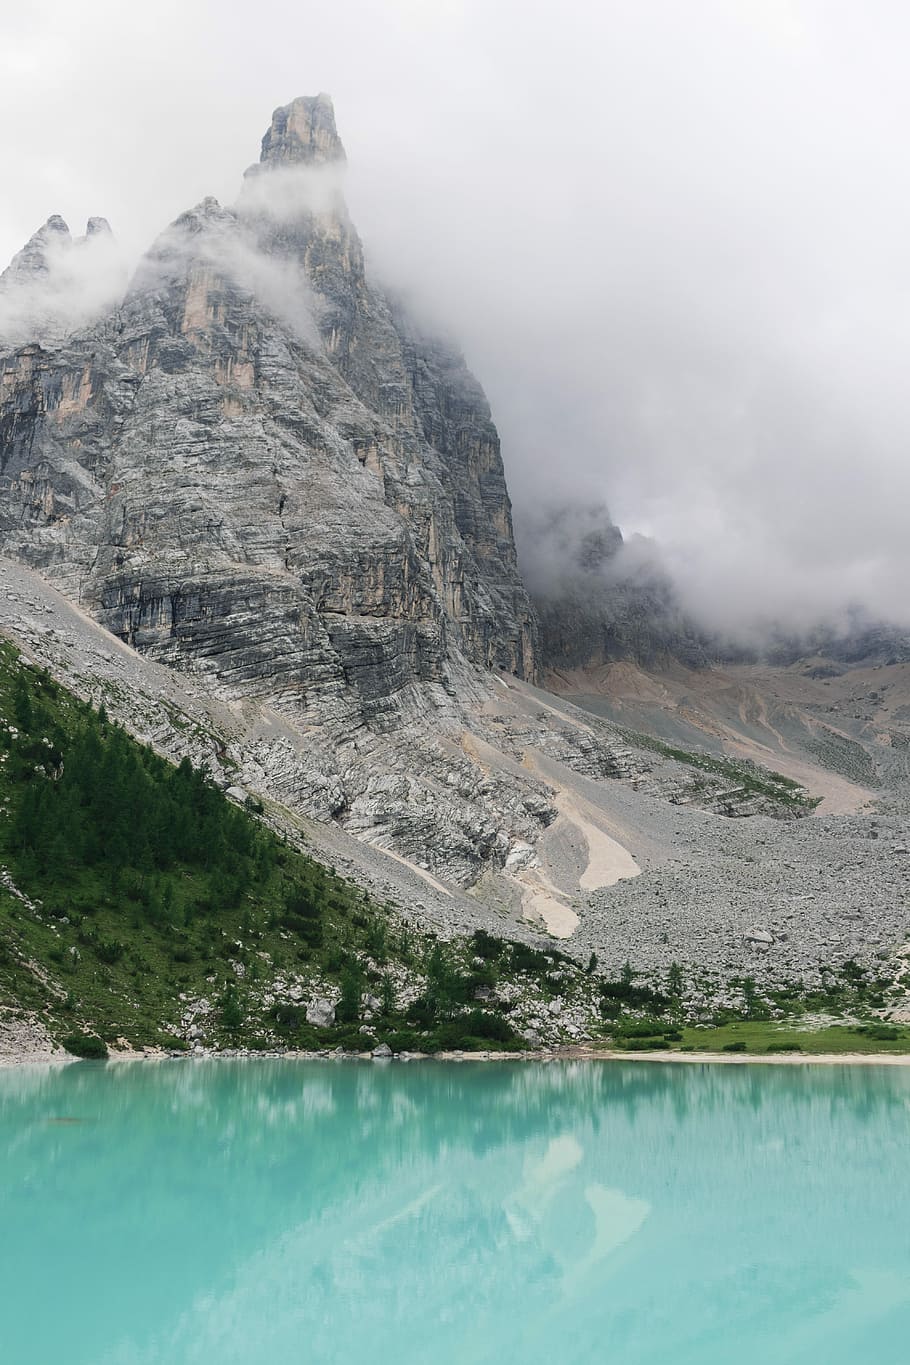 body of water at the foot of the mountain surrounded by clouds, gray and brown rock formation under cloudy sky